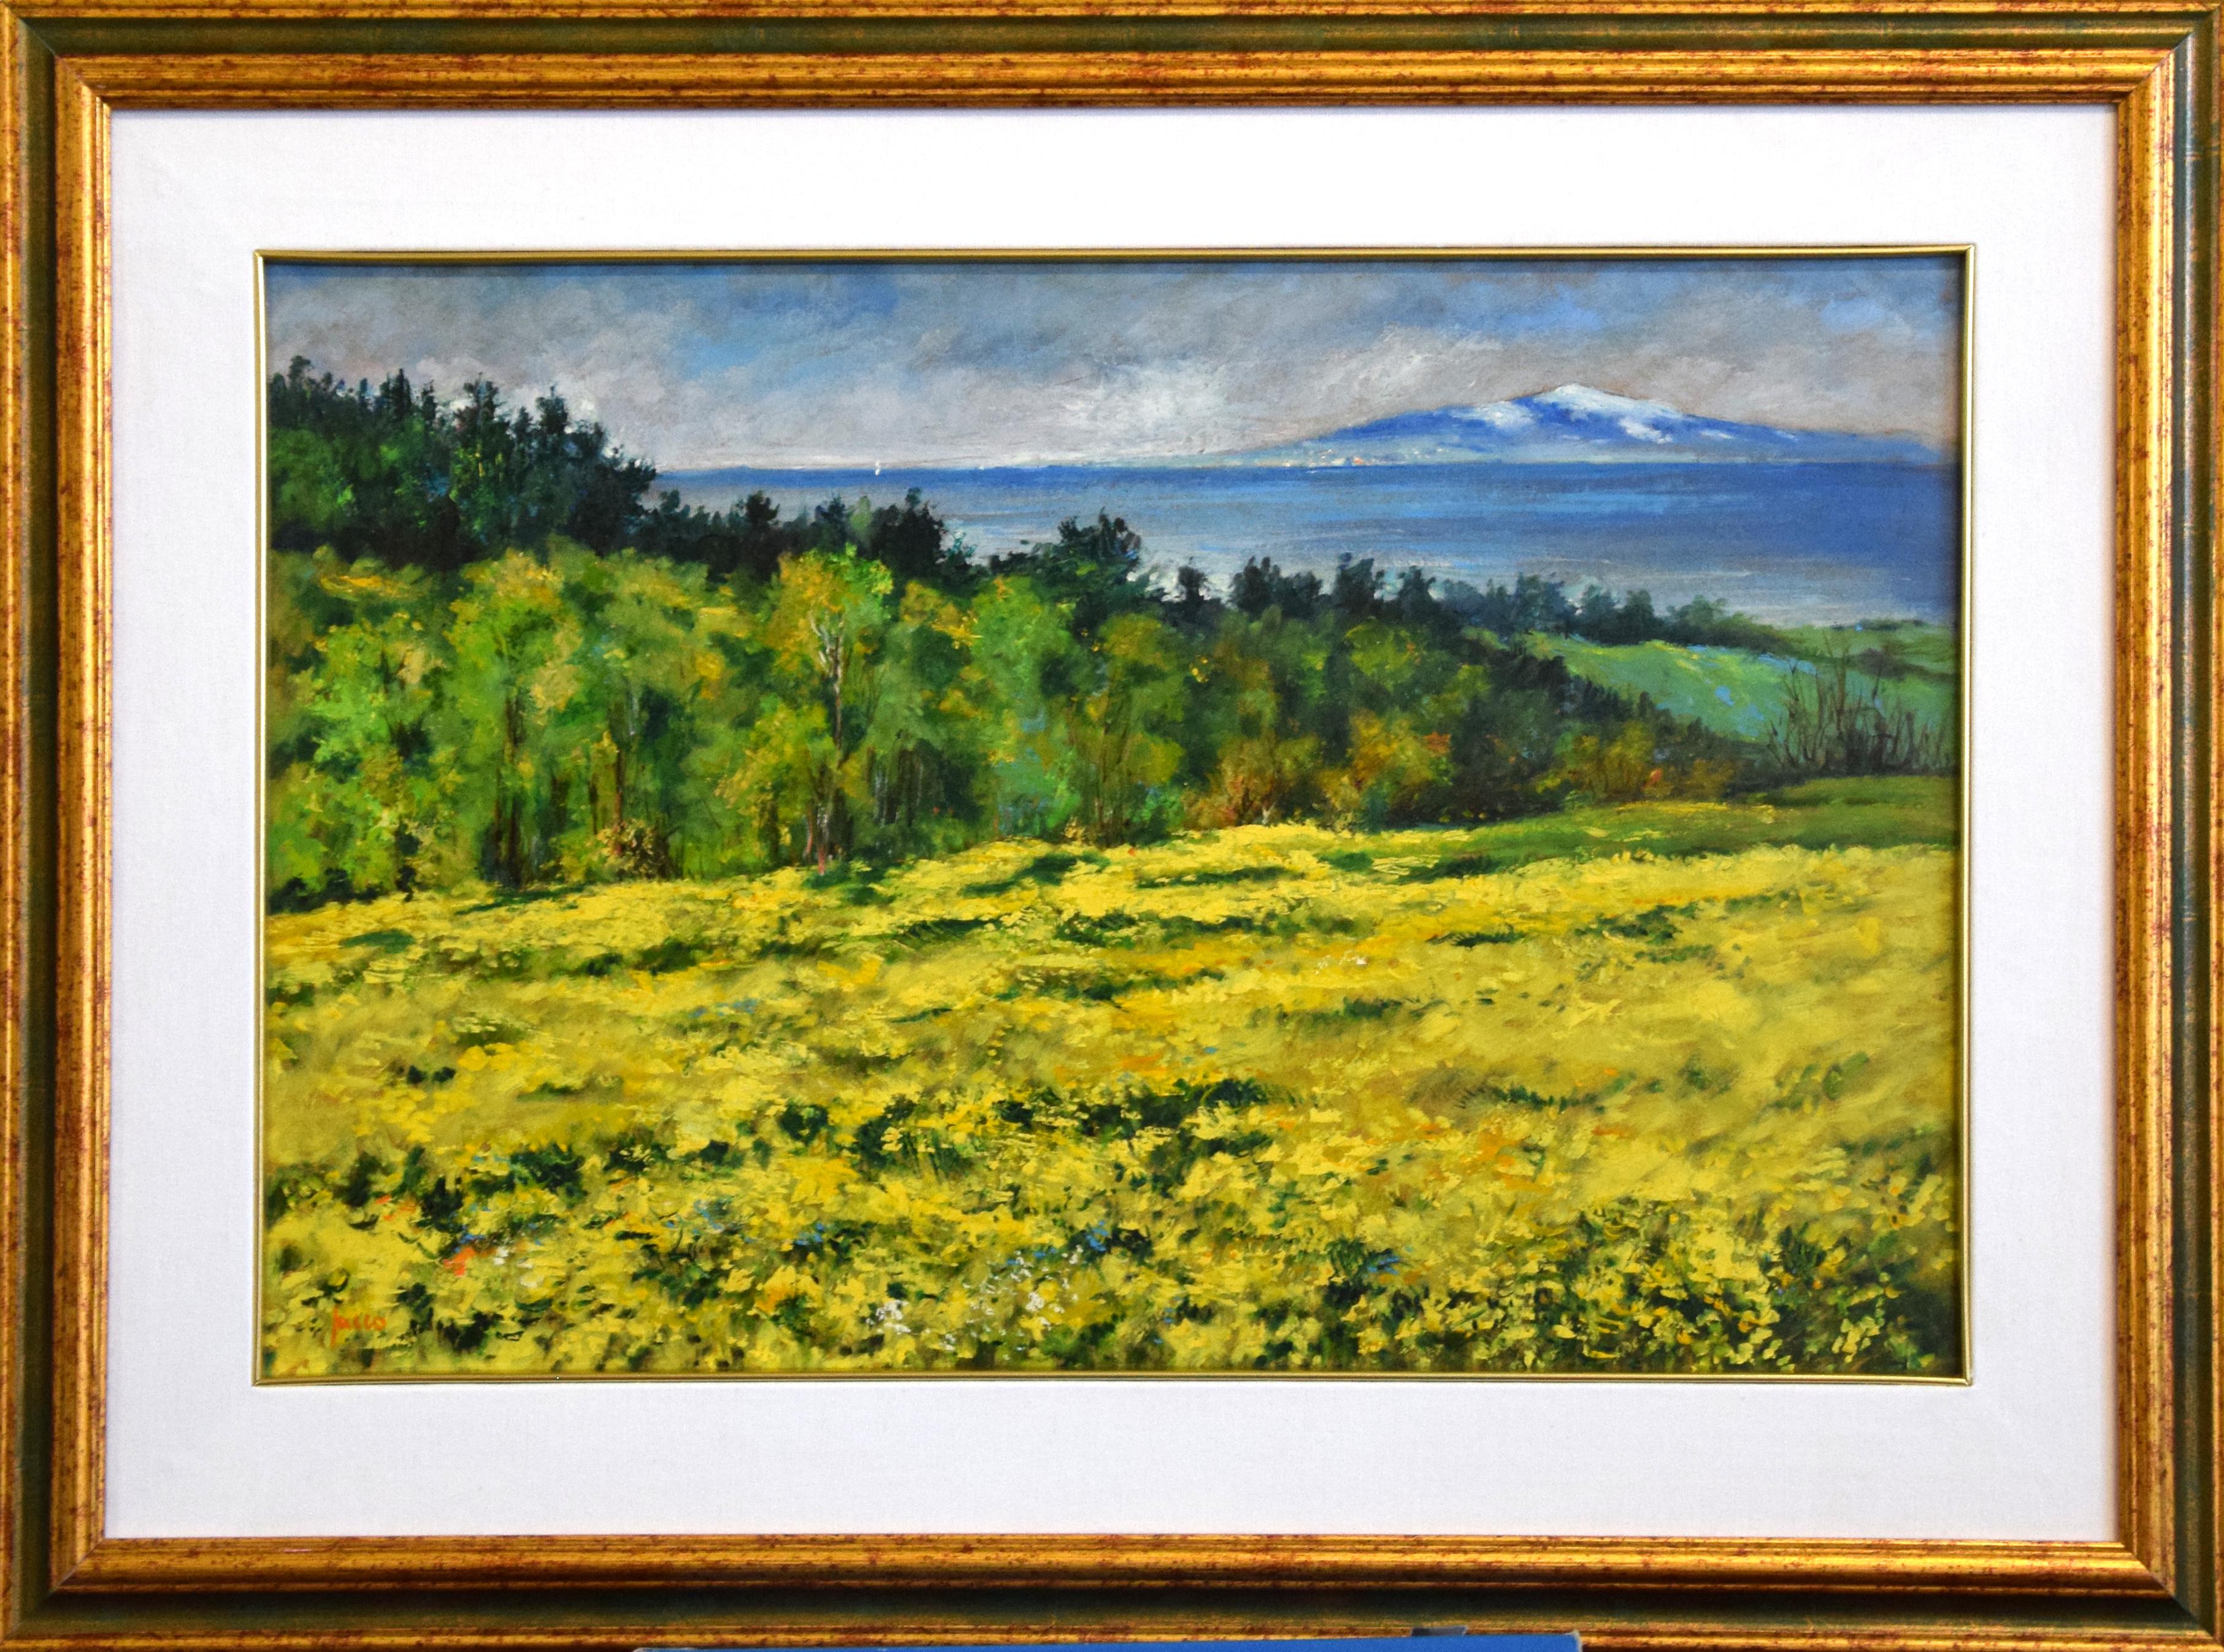 L'Etna Vista Dalla Sila is a pleasing oil painting on masonite realized by the Italian contemporary artist Luciano Sacco. Including a frame (58 x 78 cm). Hand-signed by the artist on the lower left. 

Reference: Luciano Sacco, I colori della natura,